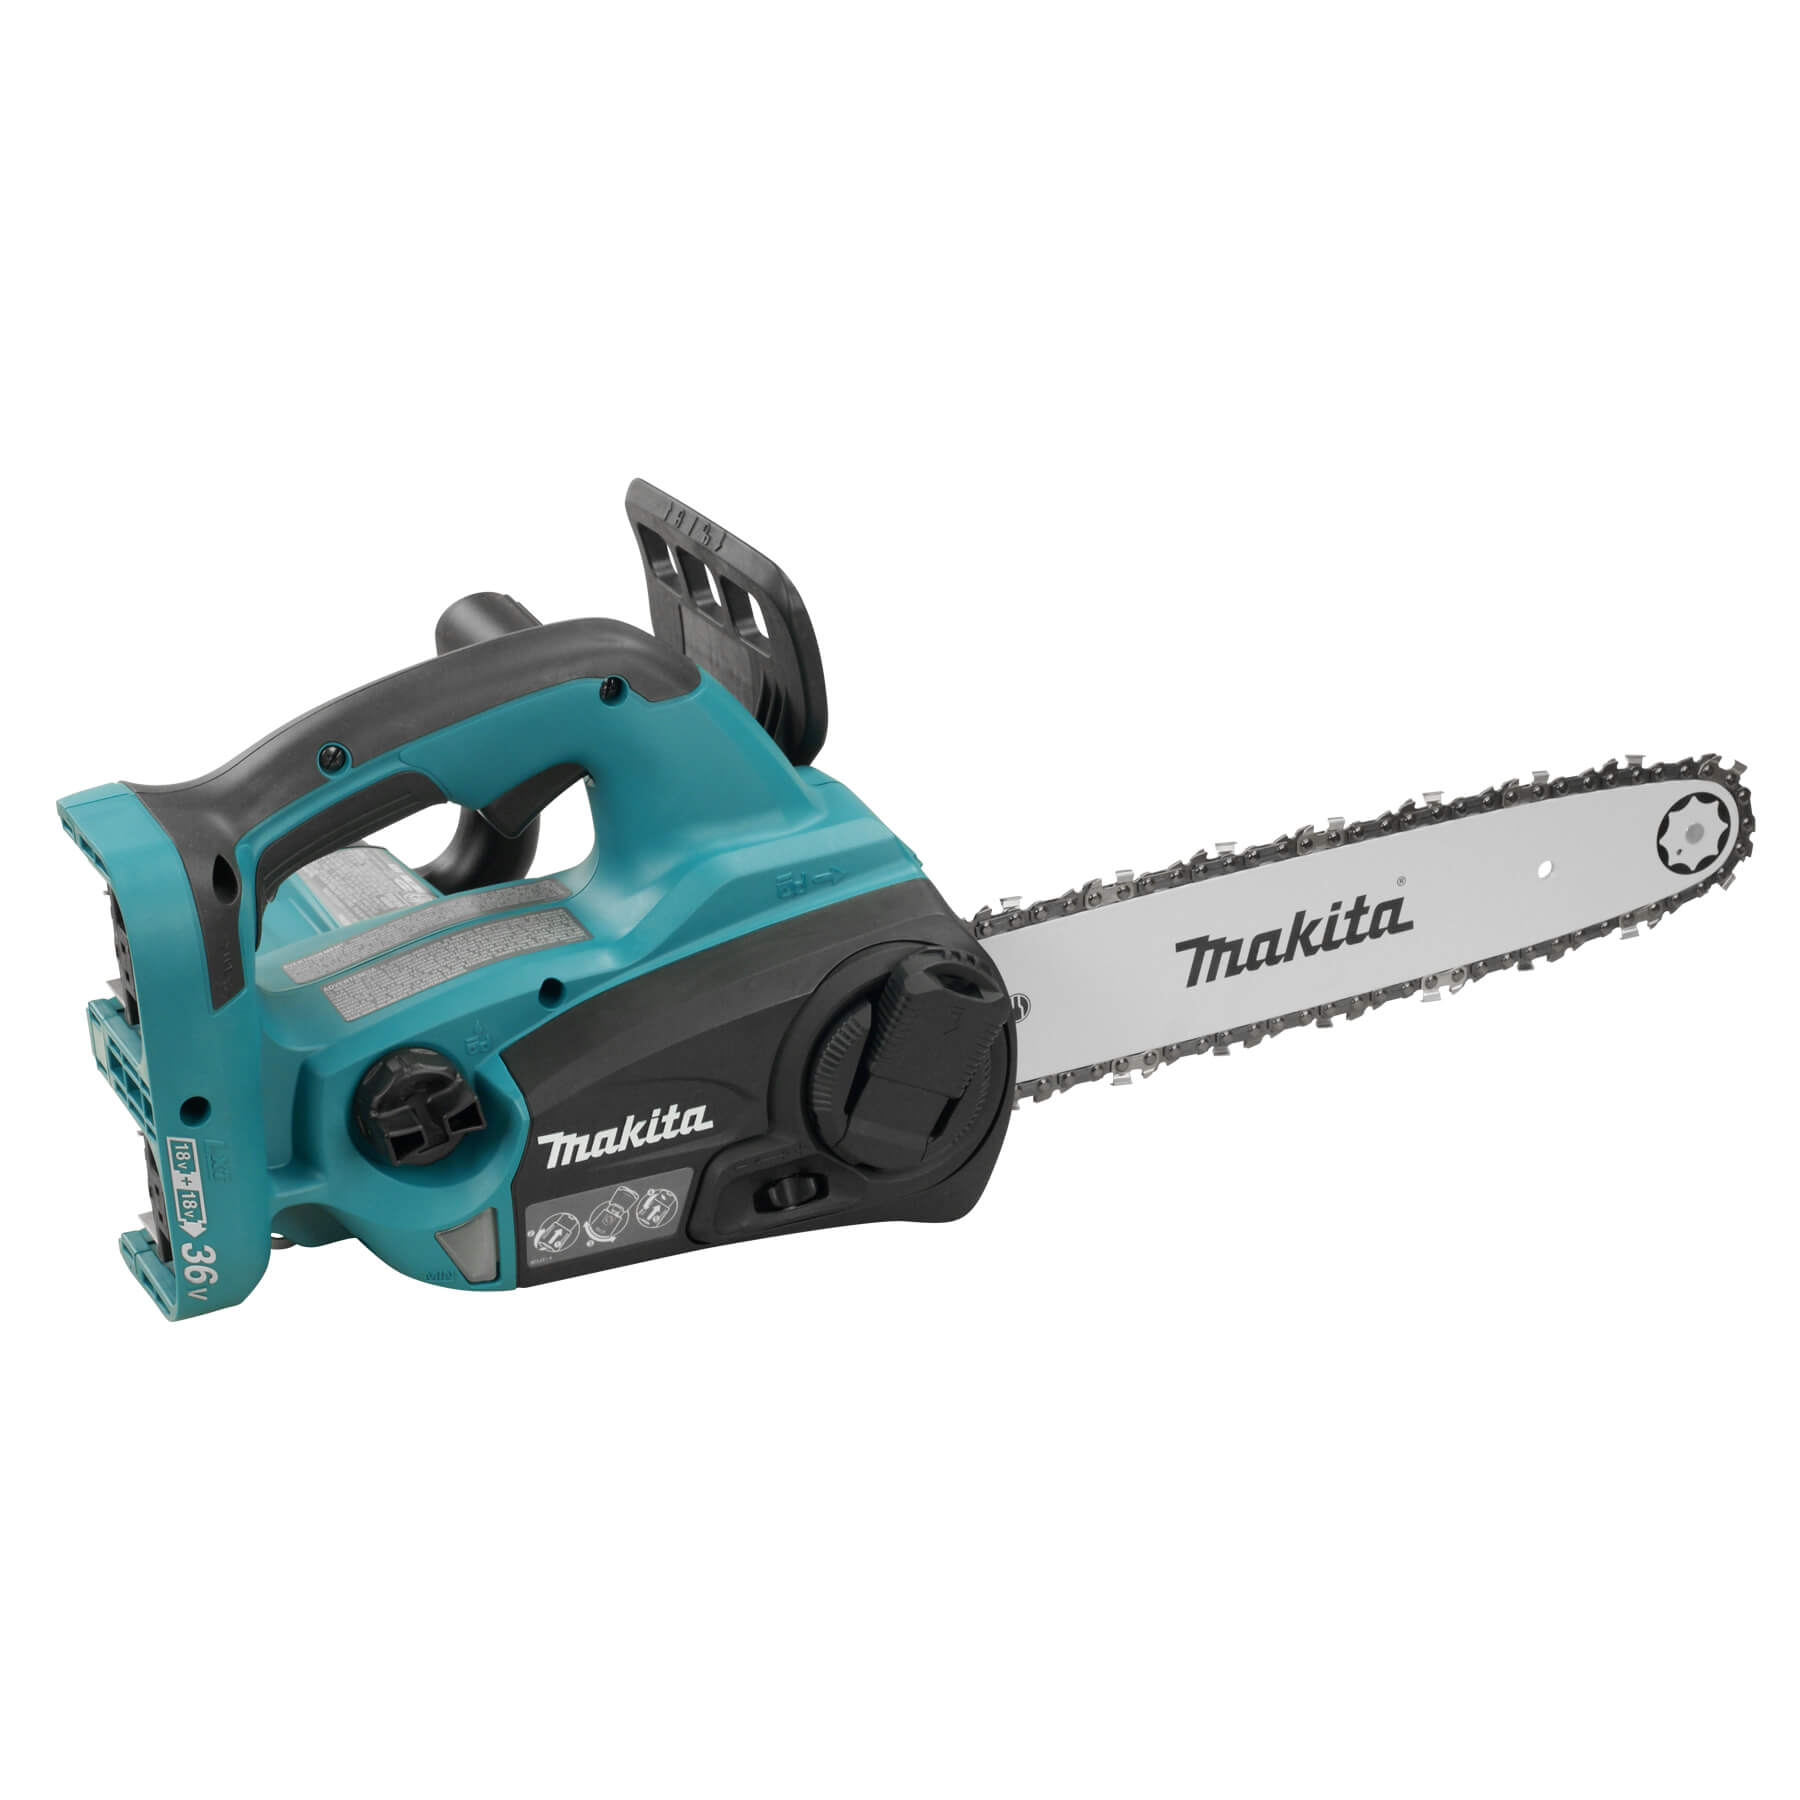 Makita DUC302Z - LXT 18Vx2 12" Cordless Chainsaw - wise-line-tools